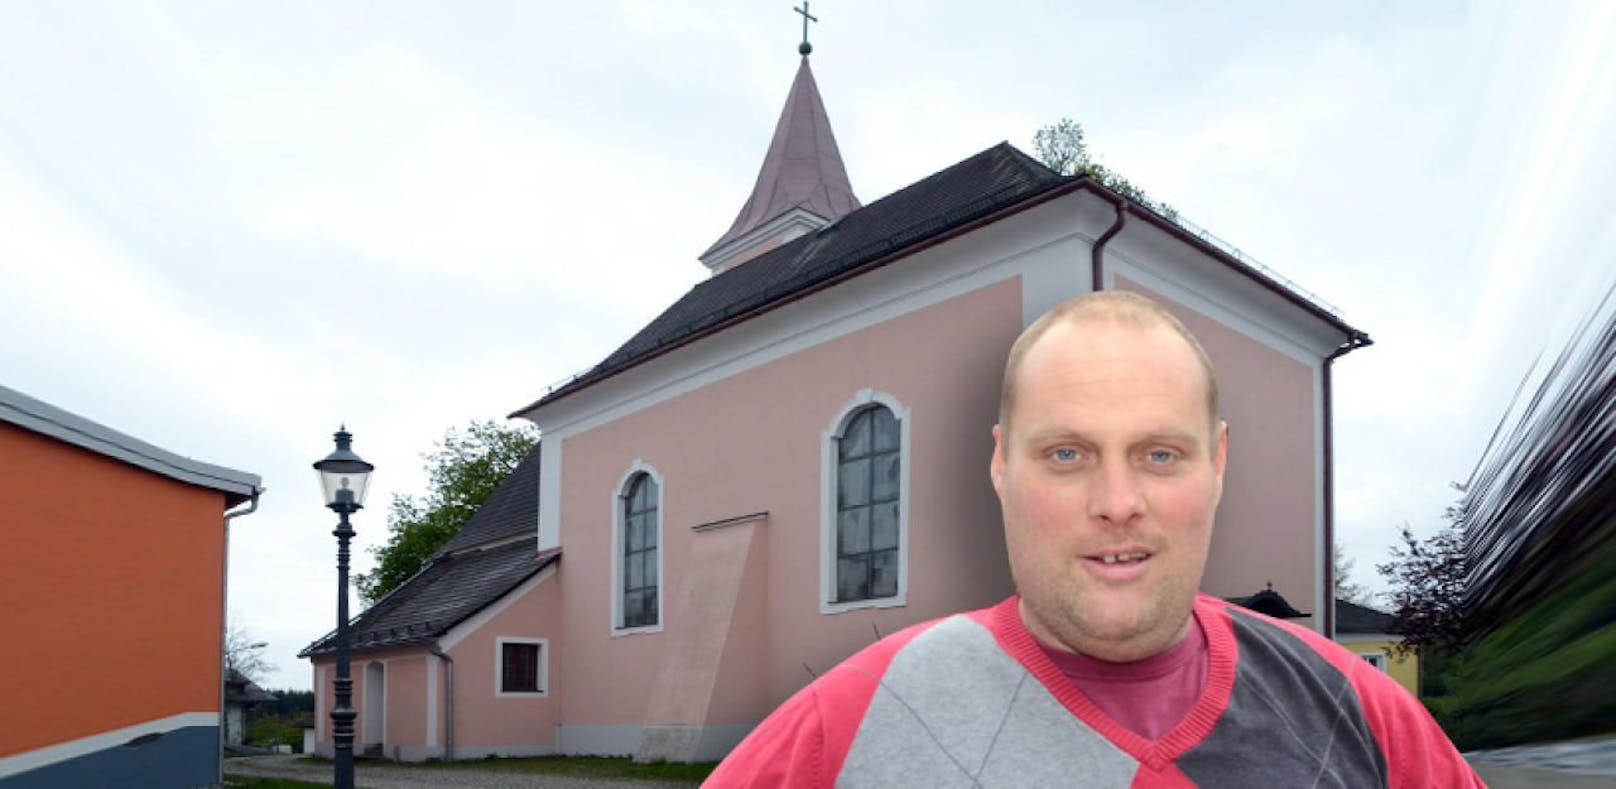 Totenschädel hing in Sackerl an Nagel in Kirche